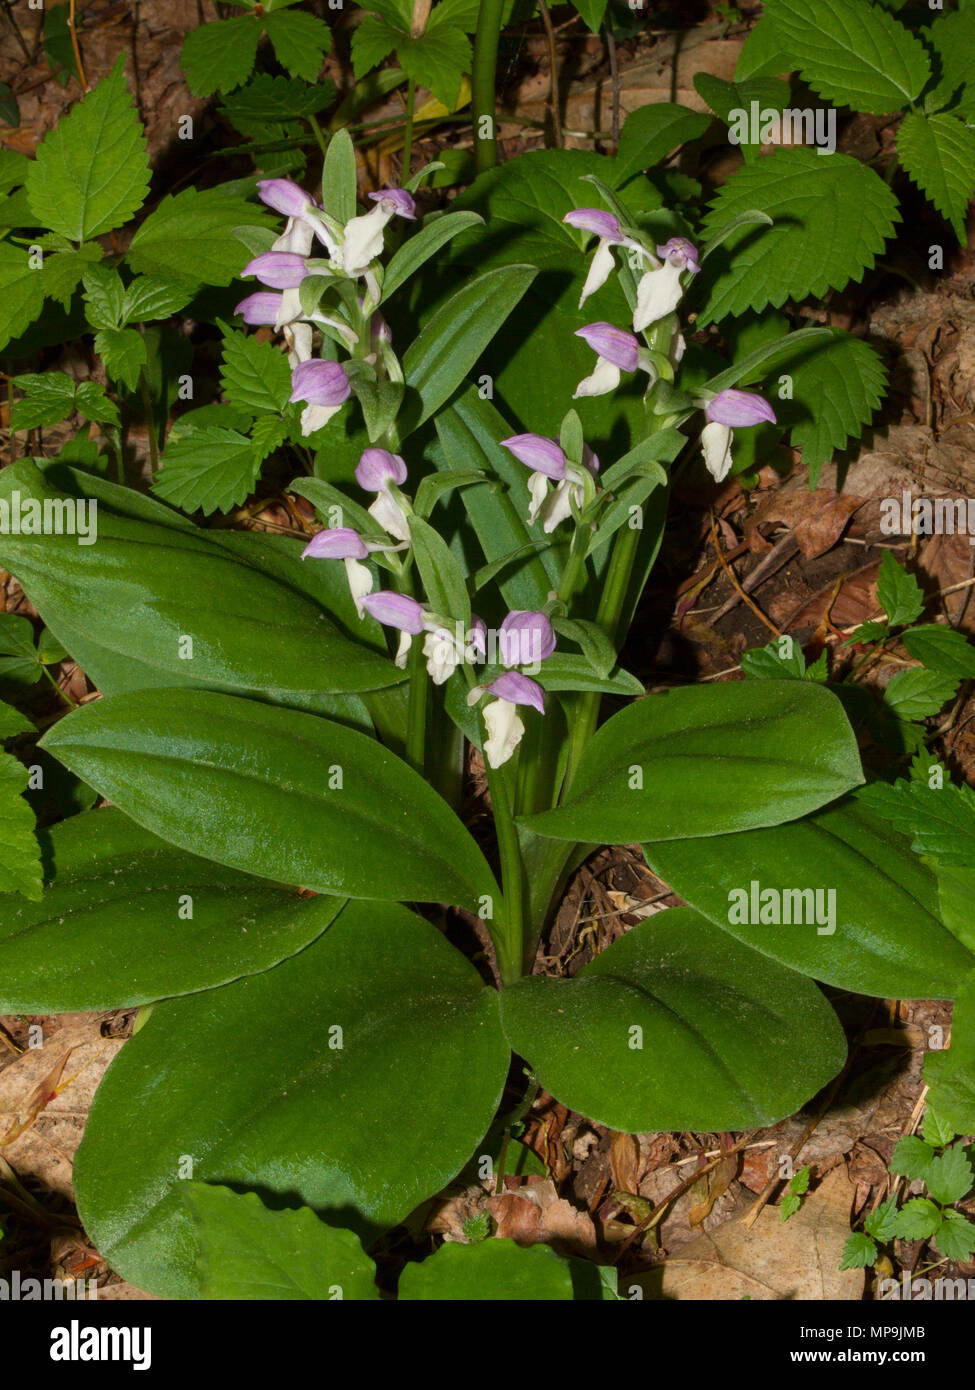 A group of showy orchids in bloom. Stock Photo